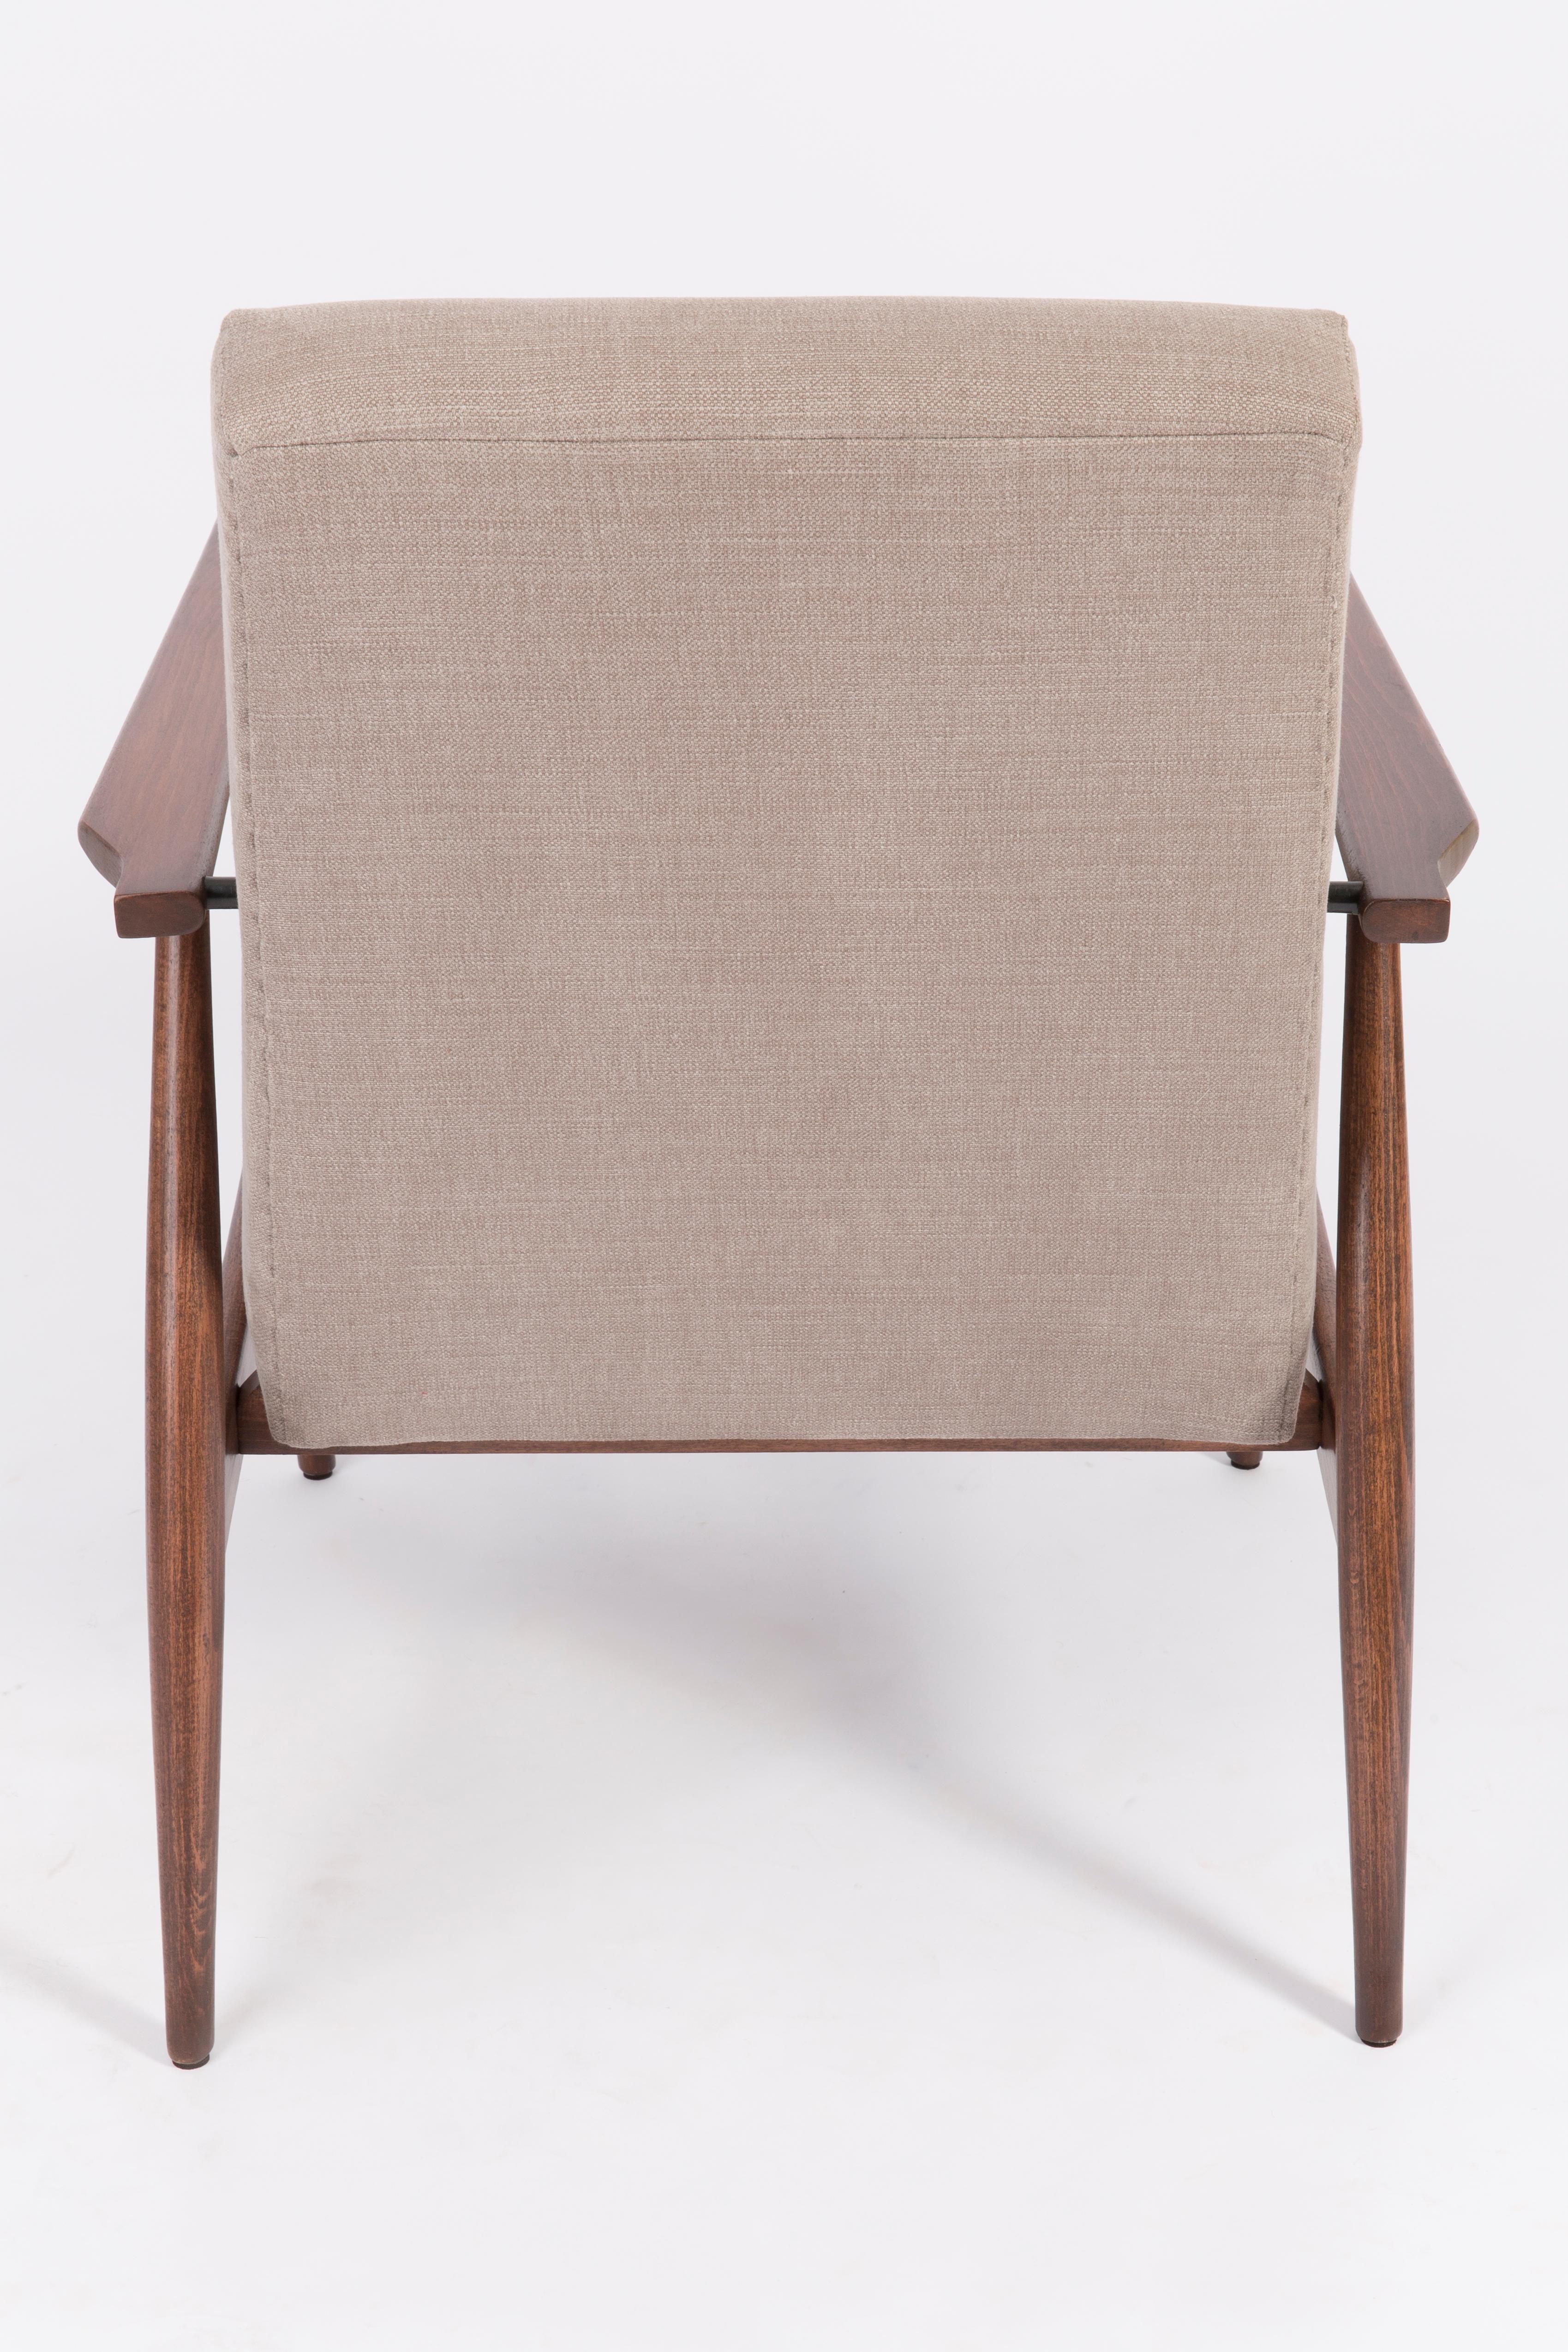 Set of Two 20th Century Beige Dante Armchairs, H. Lis, 1960s For Sale 3